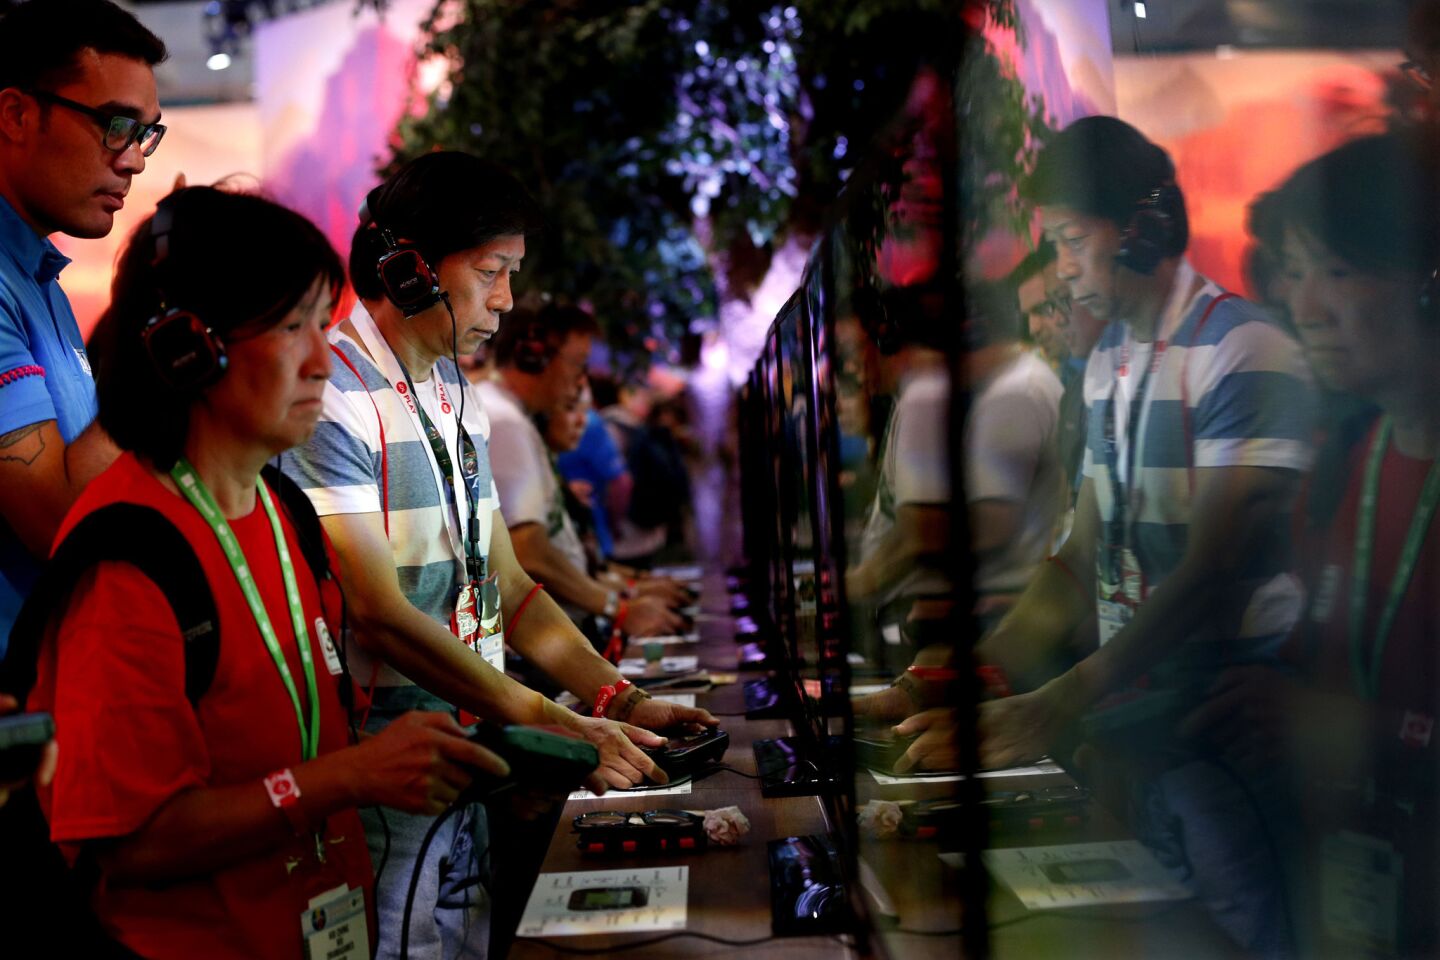 Game enthusiasts play Nintendo's "The Legend of Zelda: Breath of the Wild" during the Electronic Entertainment Expo.